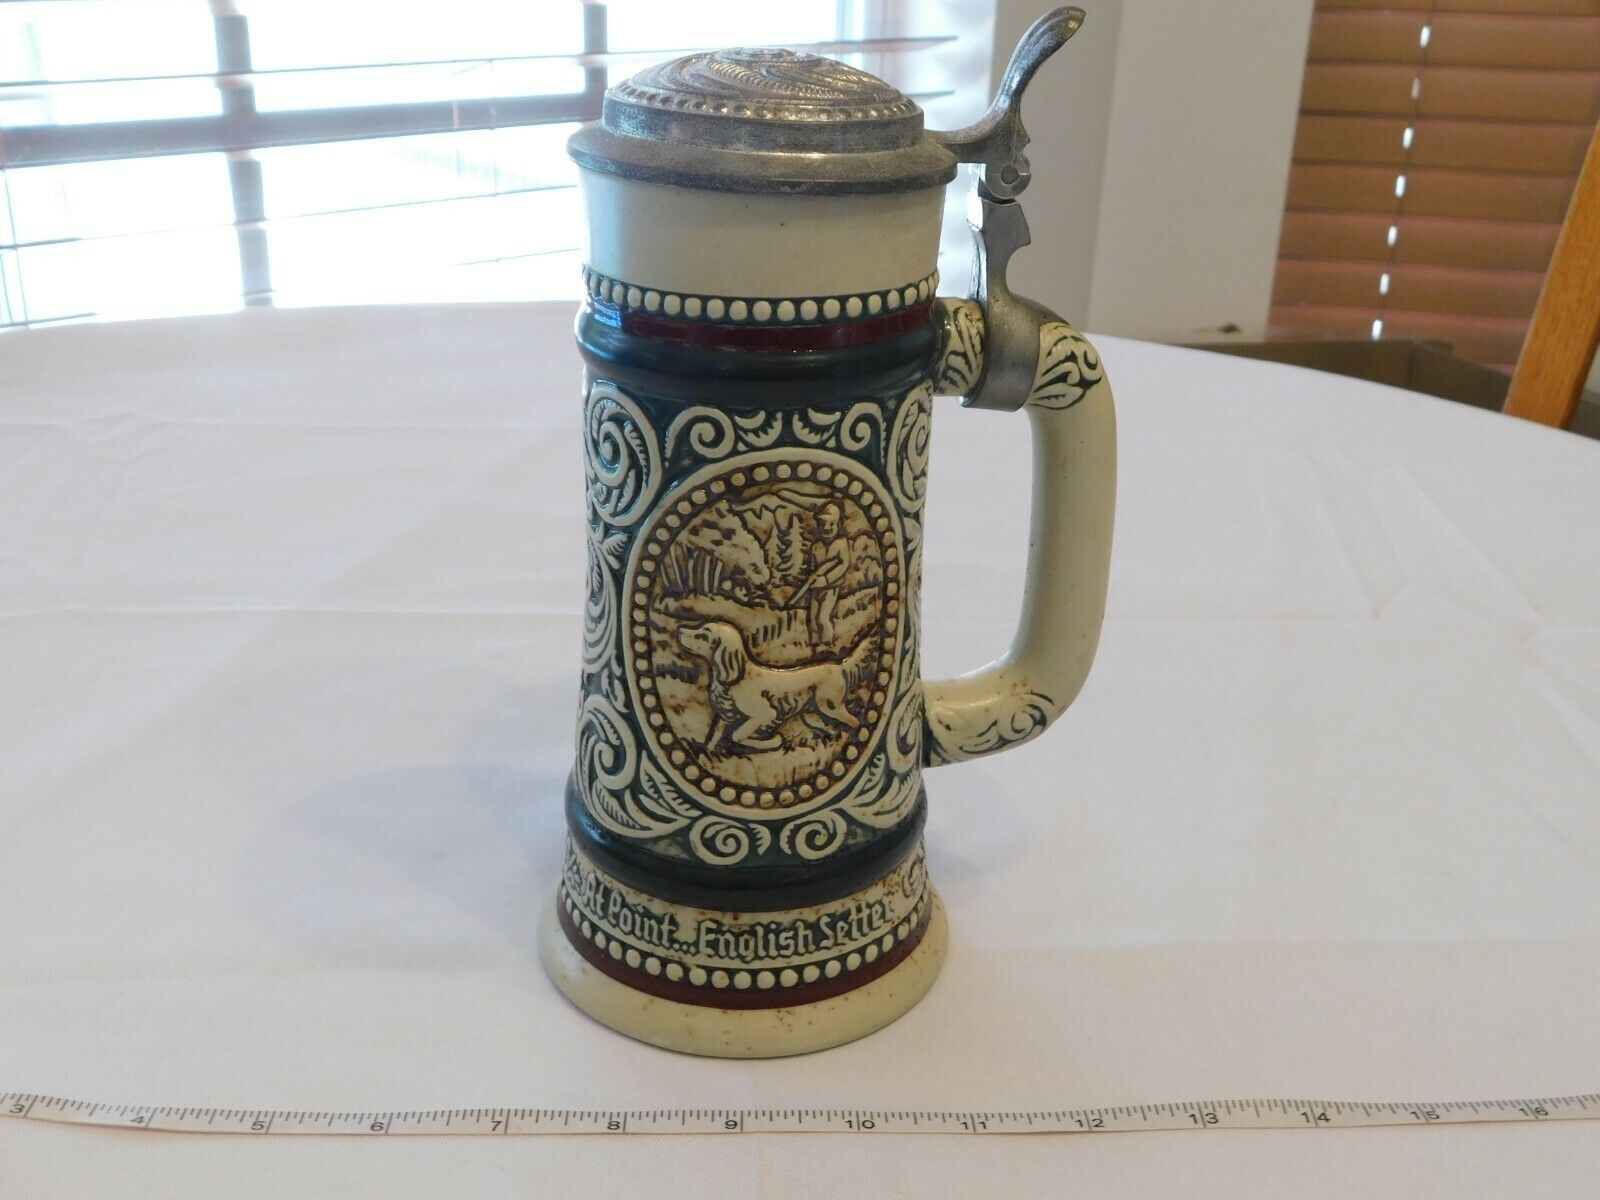 English Setter Rainbow Trout Stein Avon Products 1978 Beer Stein hinged lid - $20.58